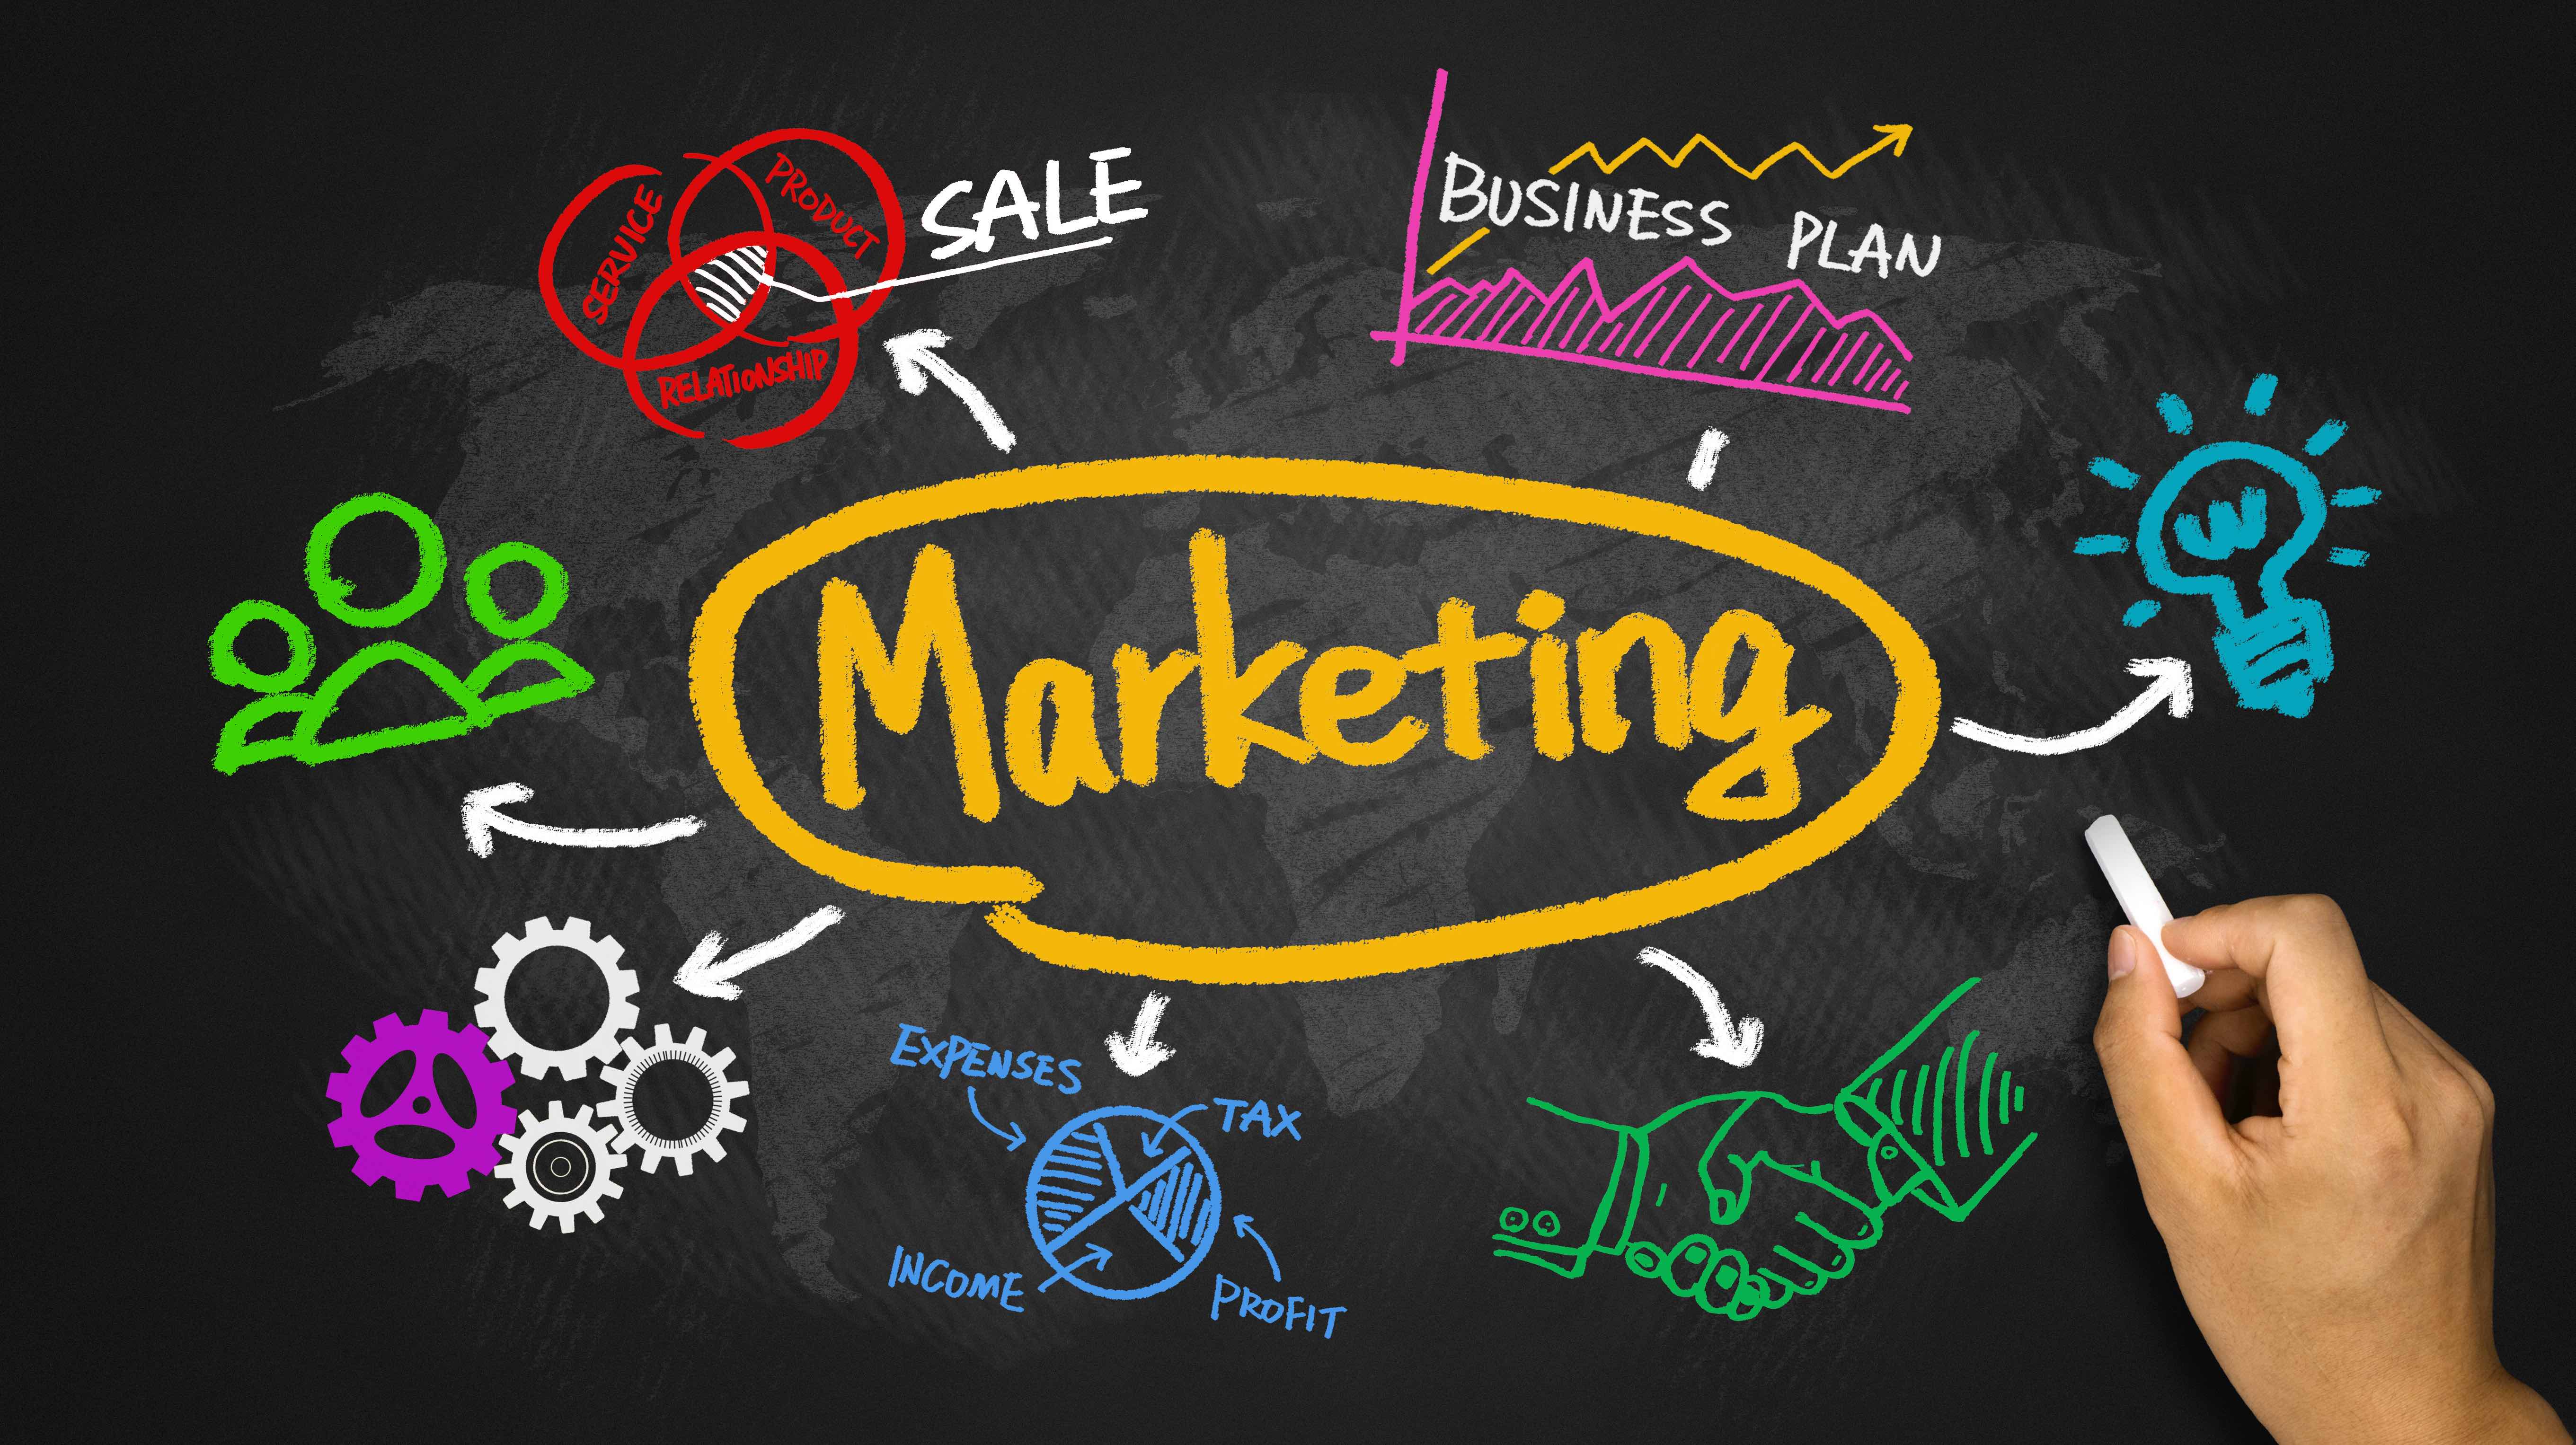 What is Niche Marketing and How Do You Market a Niche Website?